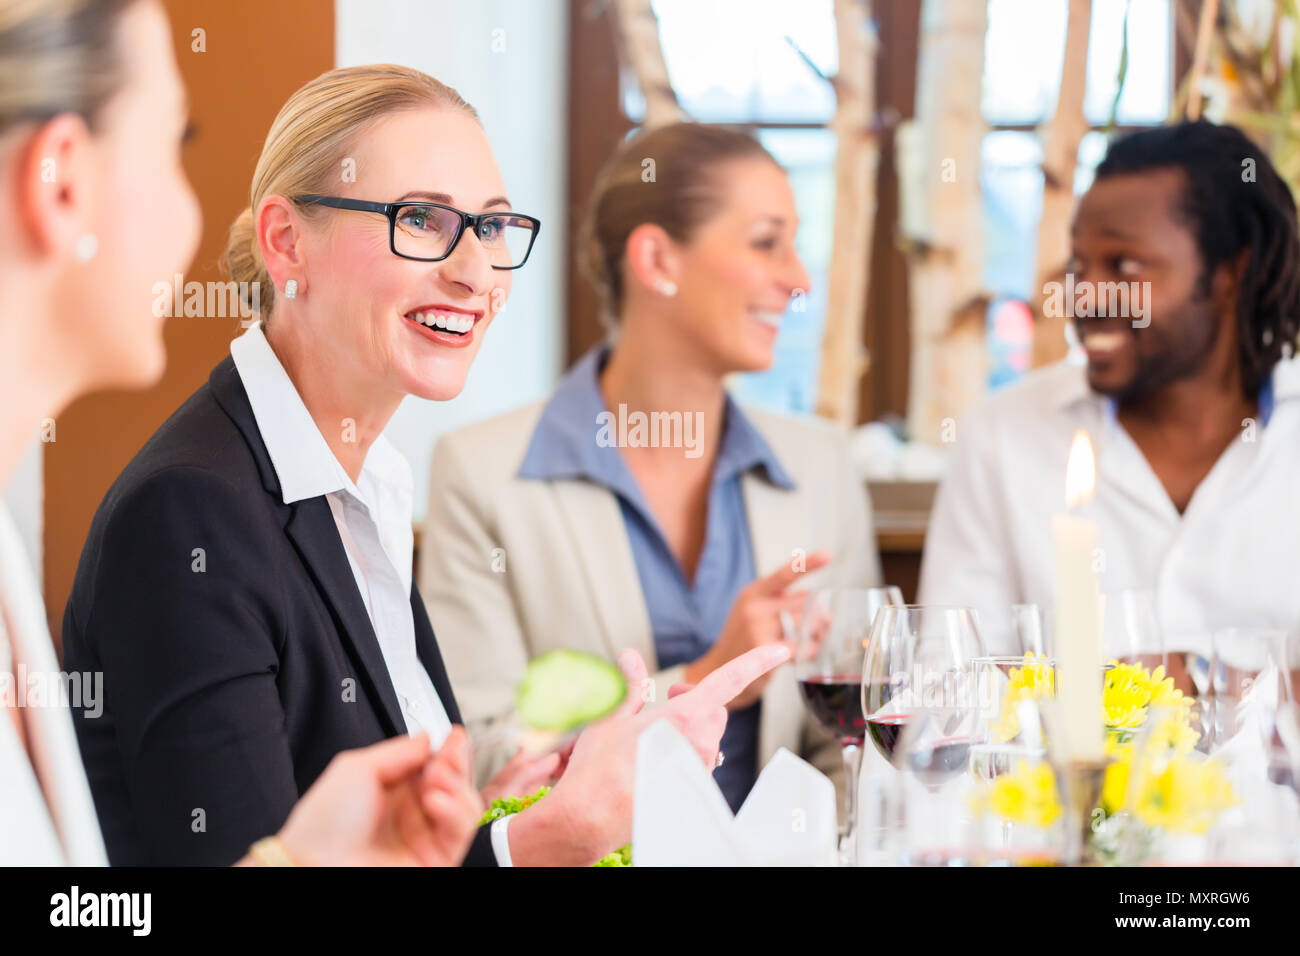 Business lunch in restaurant with food and wine Stock Photo